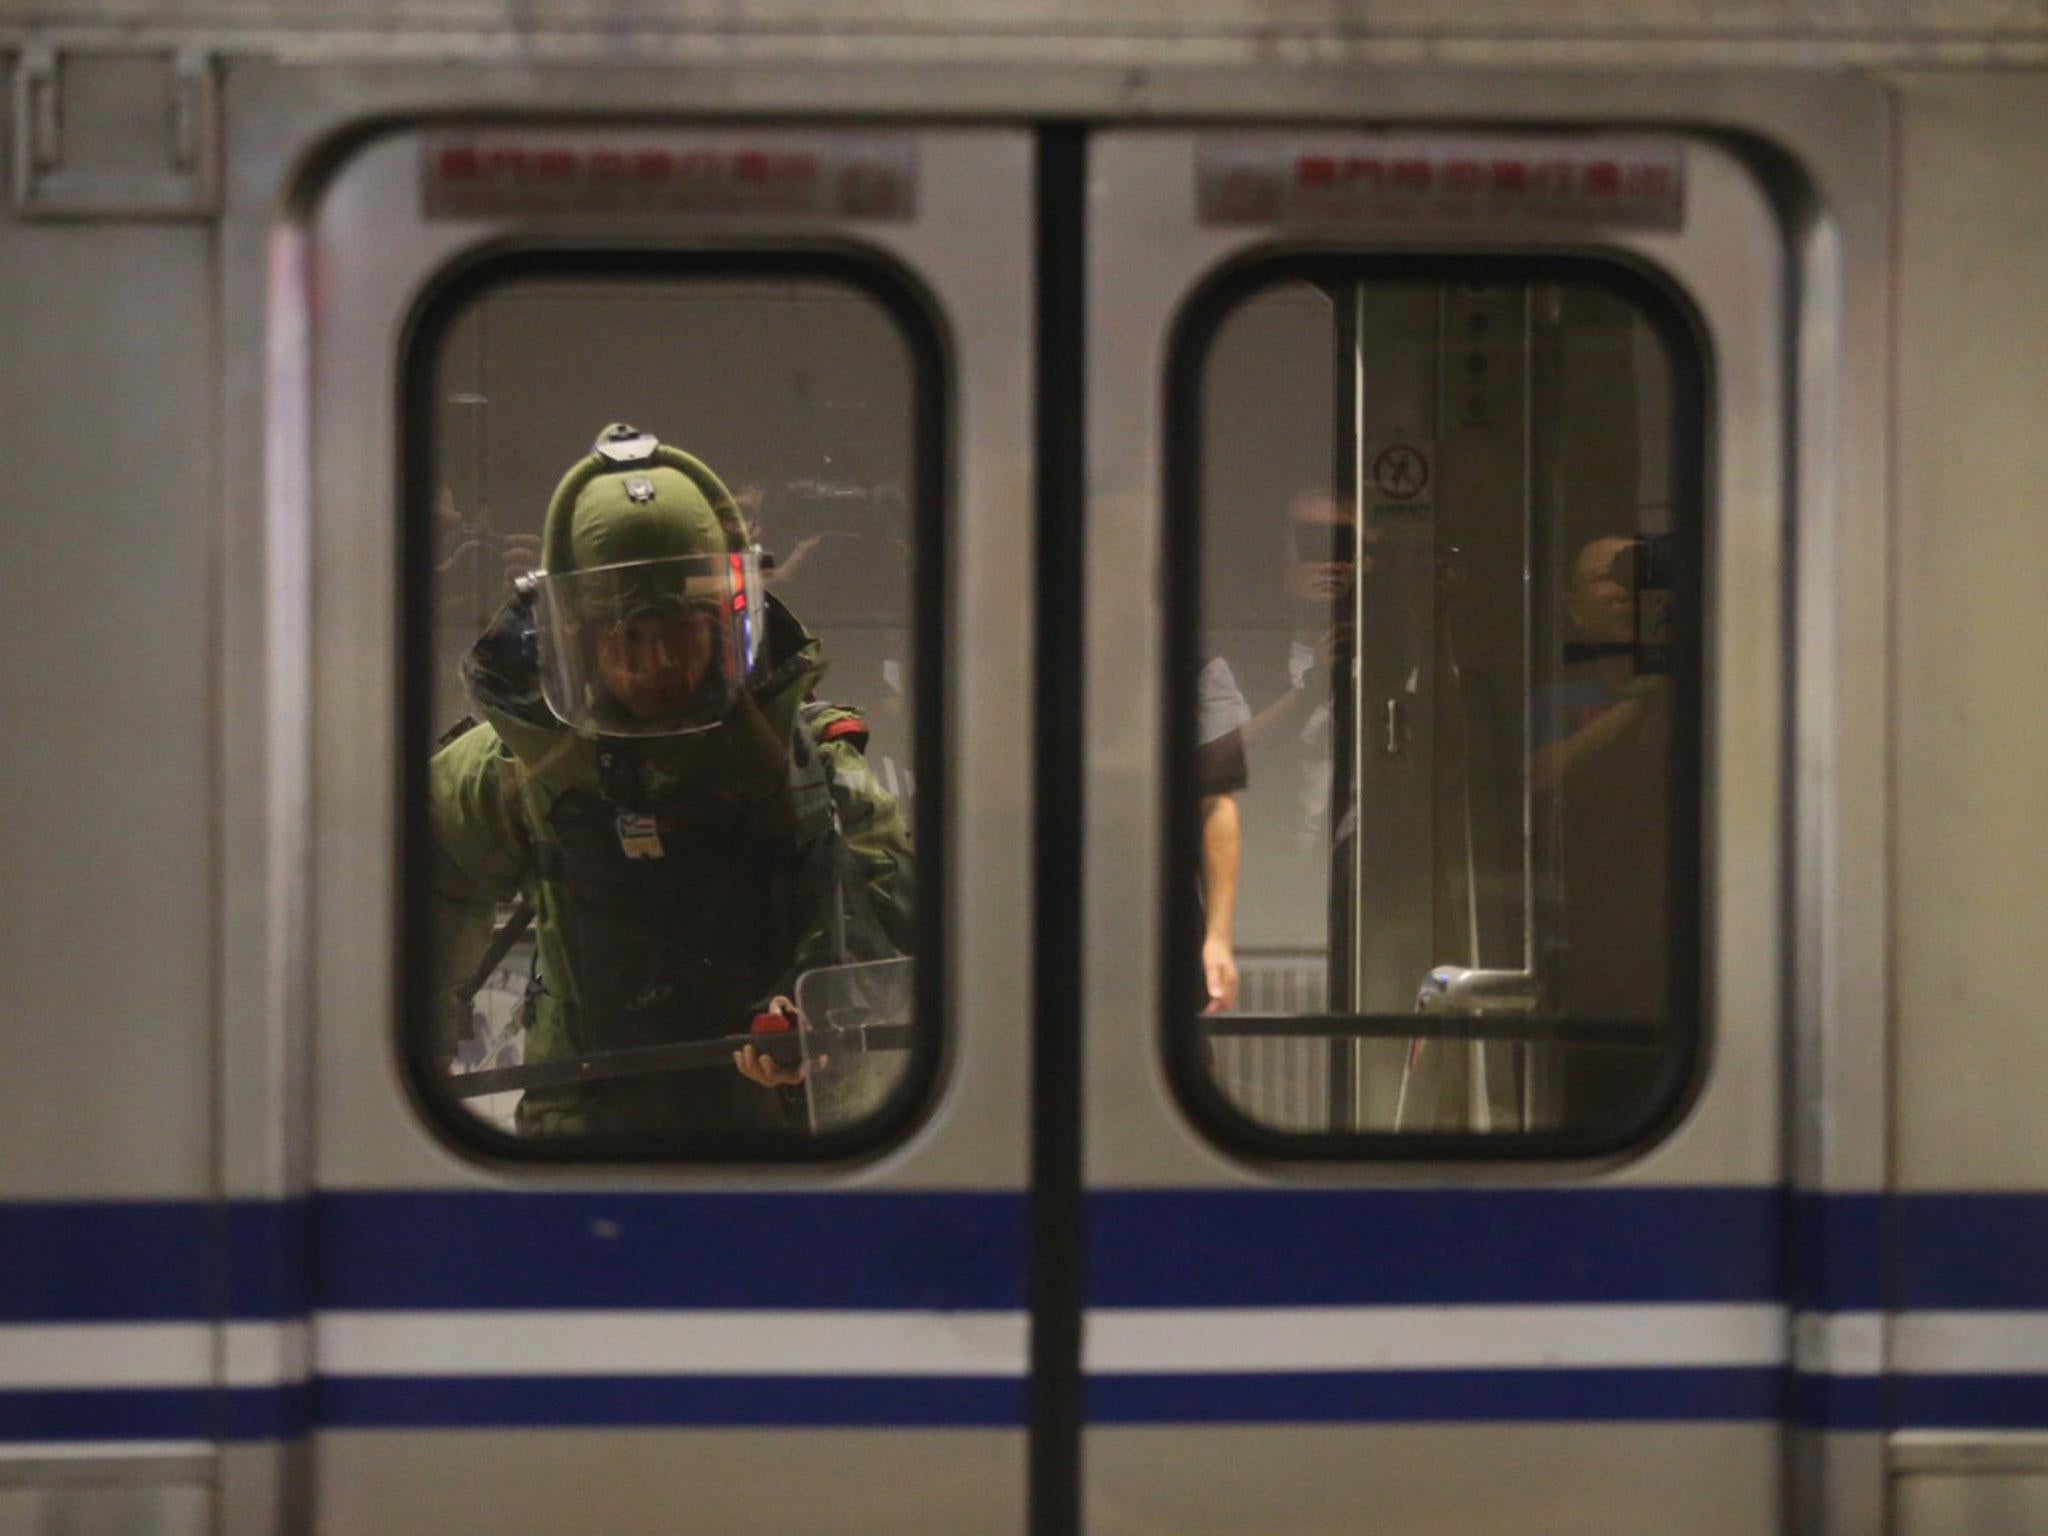 A bomb squad officer in protective gear enters the inside of a train carriage after the blast in Taipei